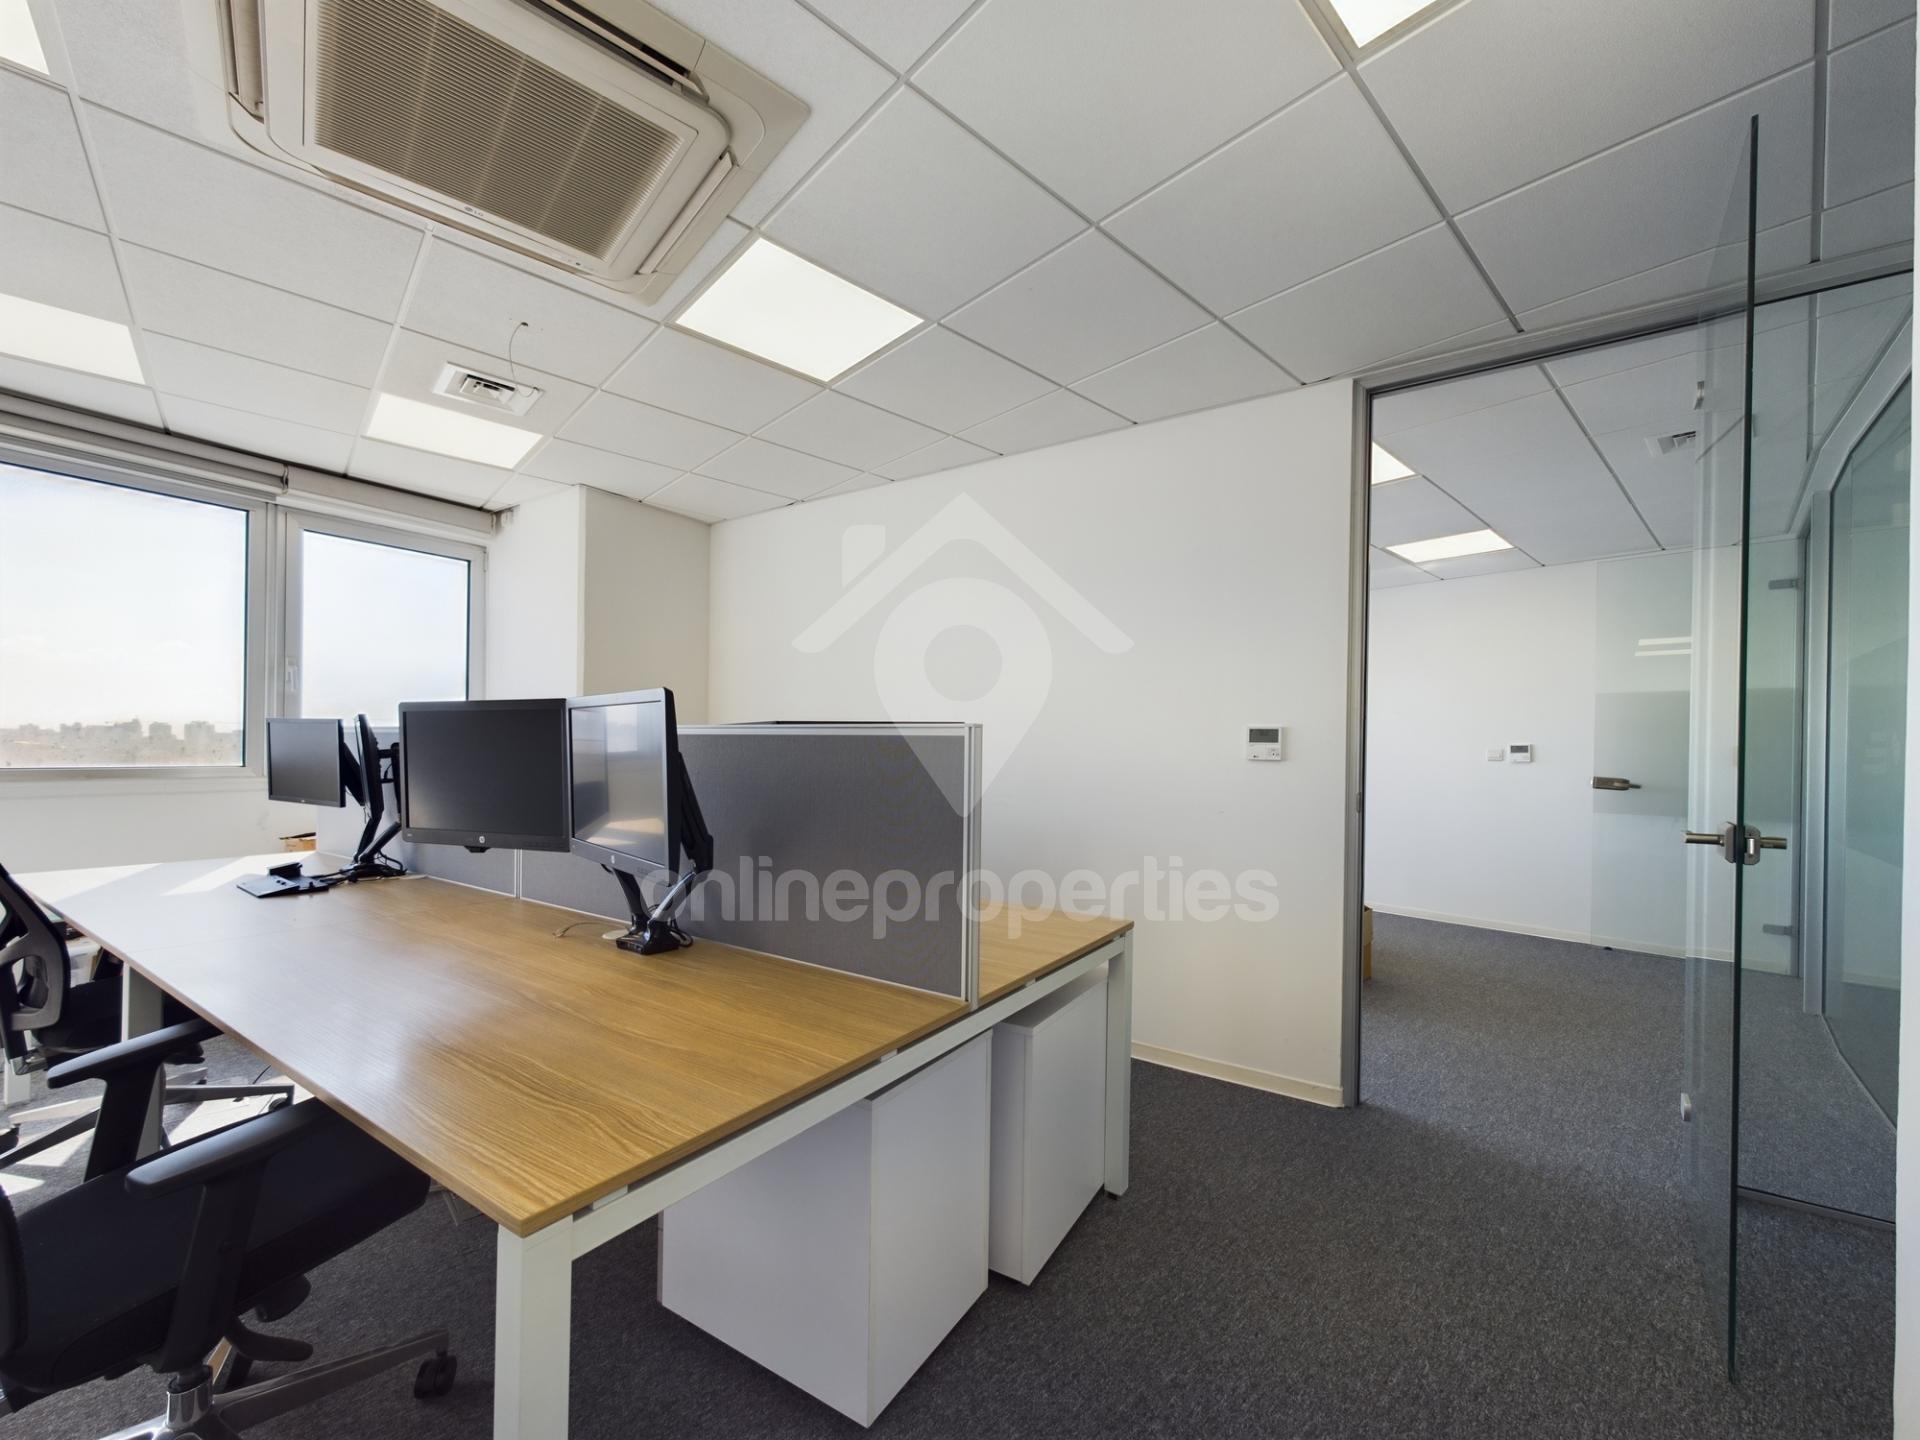 Modern offices in excellent condition, central location 